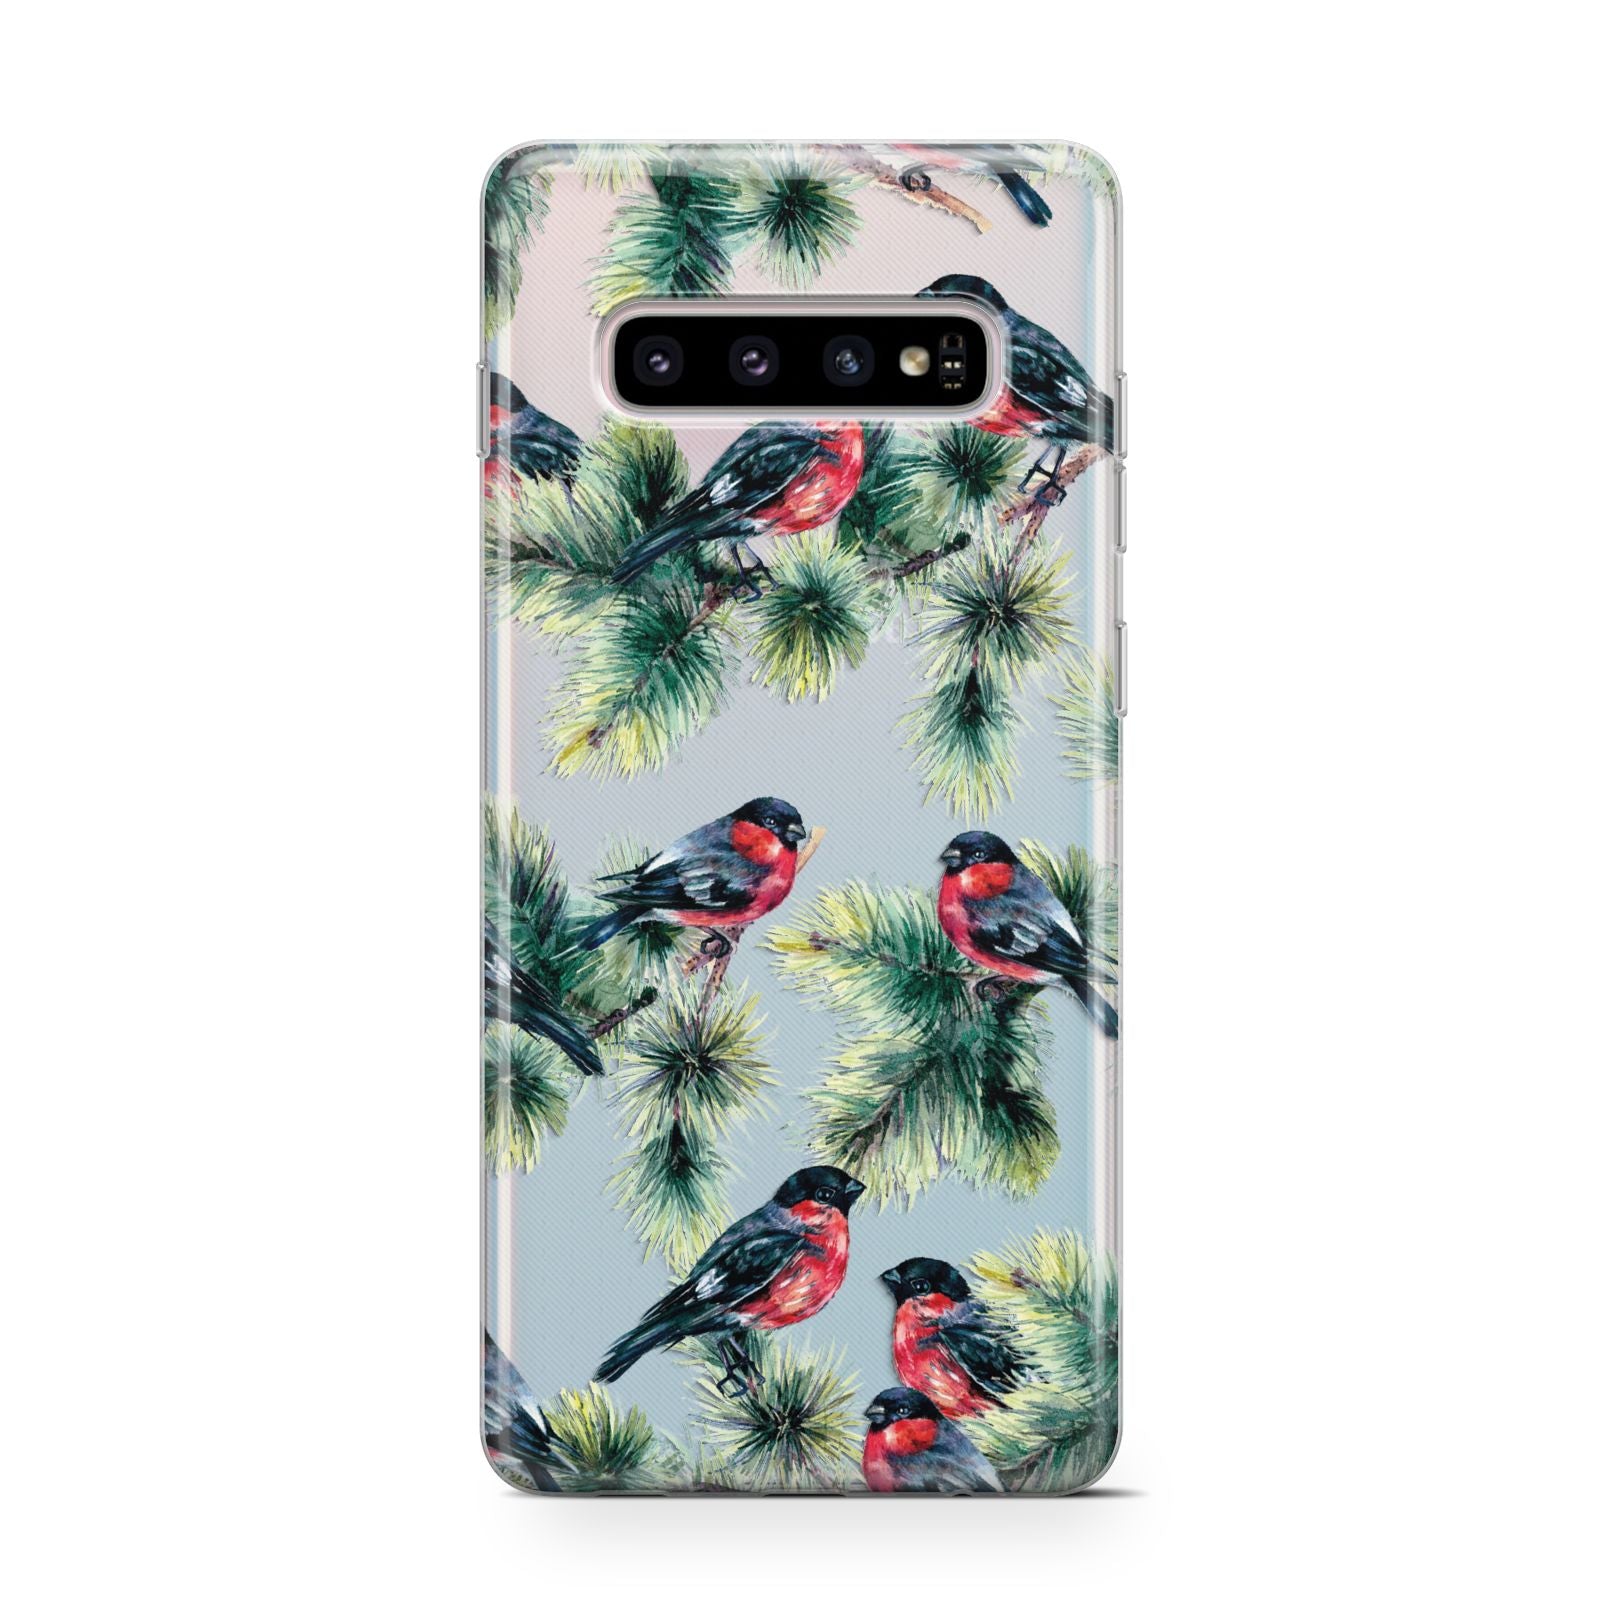 Under The Trees Samsung S10 Case